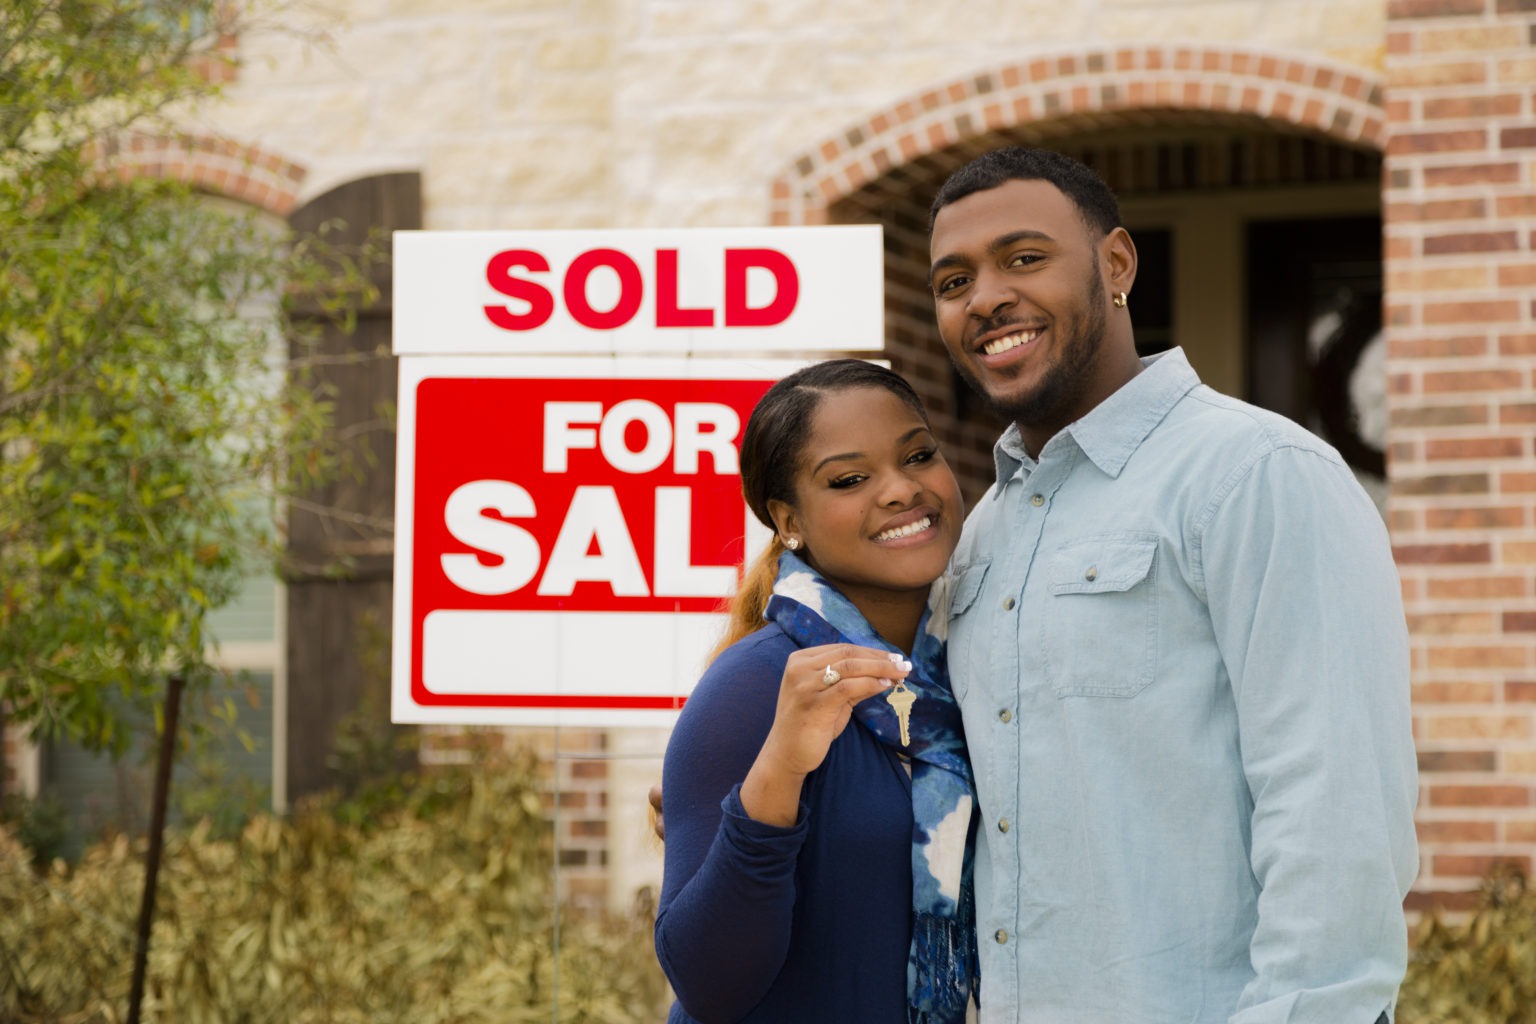 African descent couple shows off key after purchasing a new home. 'Sold',  'For Sale' sign in background. Front entrance of this beautiful brick and stone home.